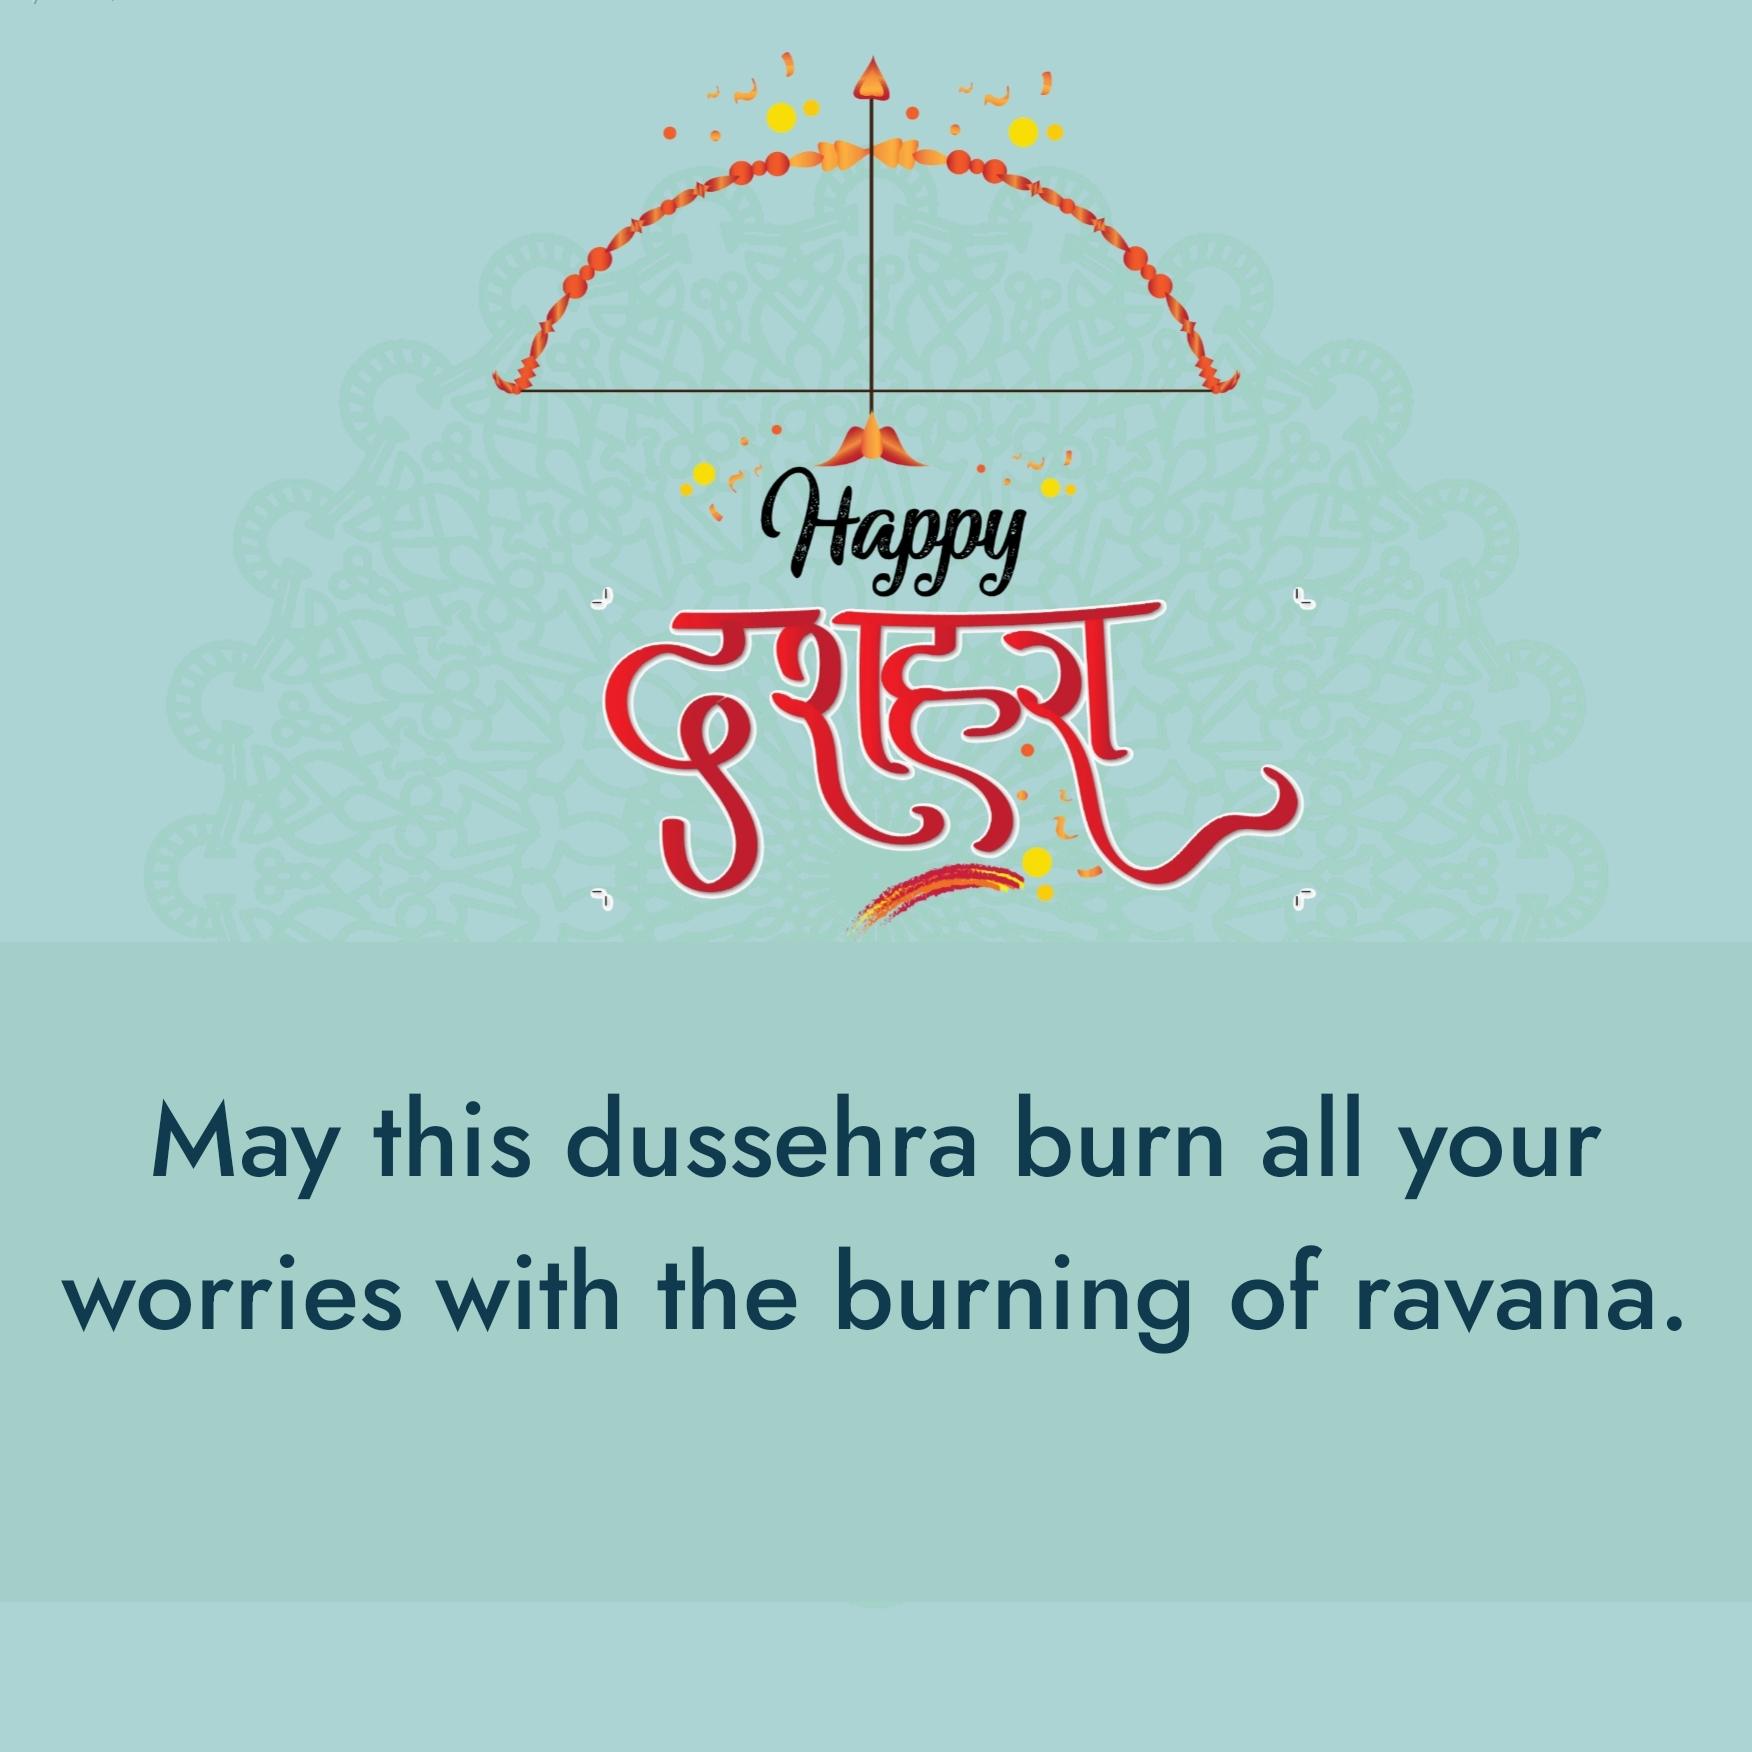 May this dussehra burn all your worries